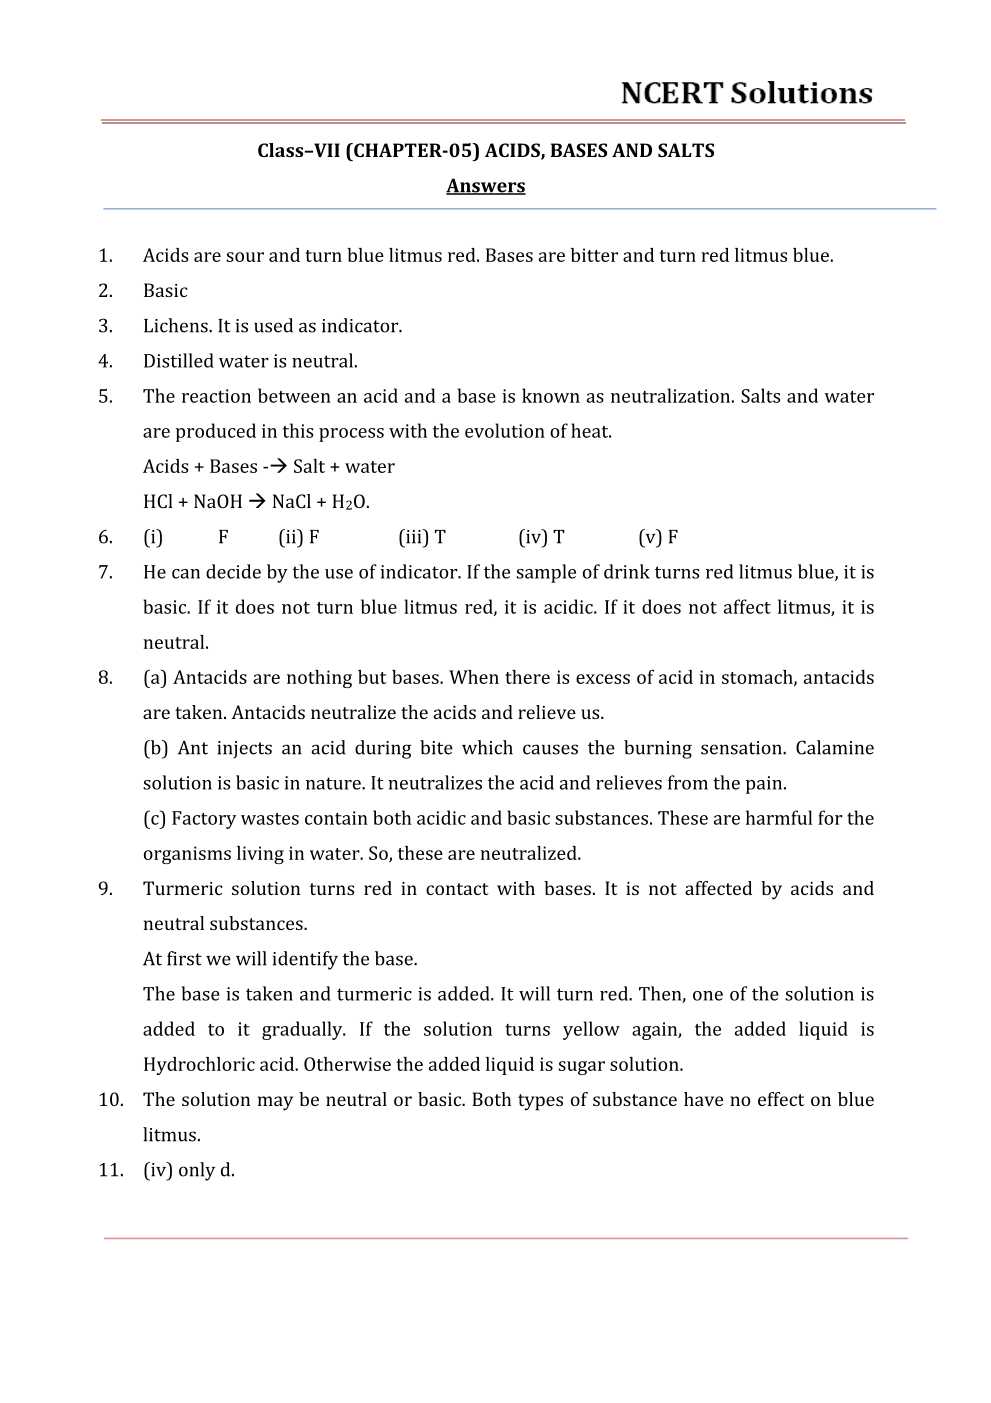 NCERT Solutions For Class 7 science Chapter 5 Acids, Bases and Salts